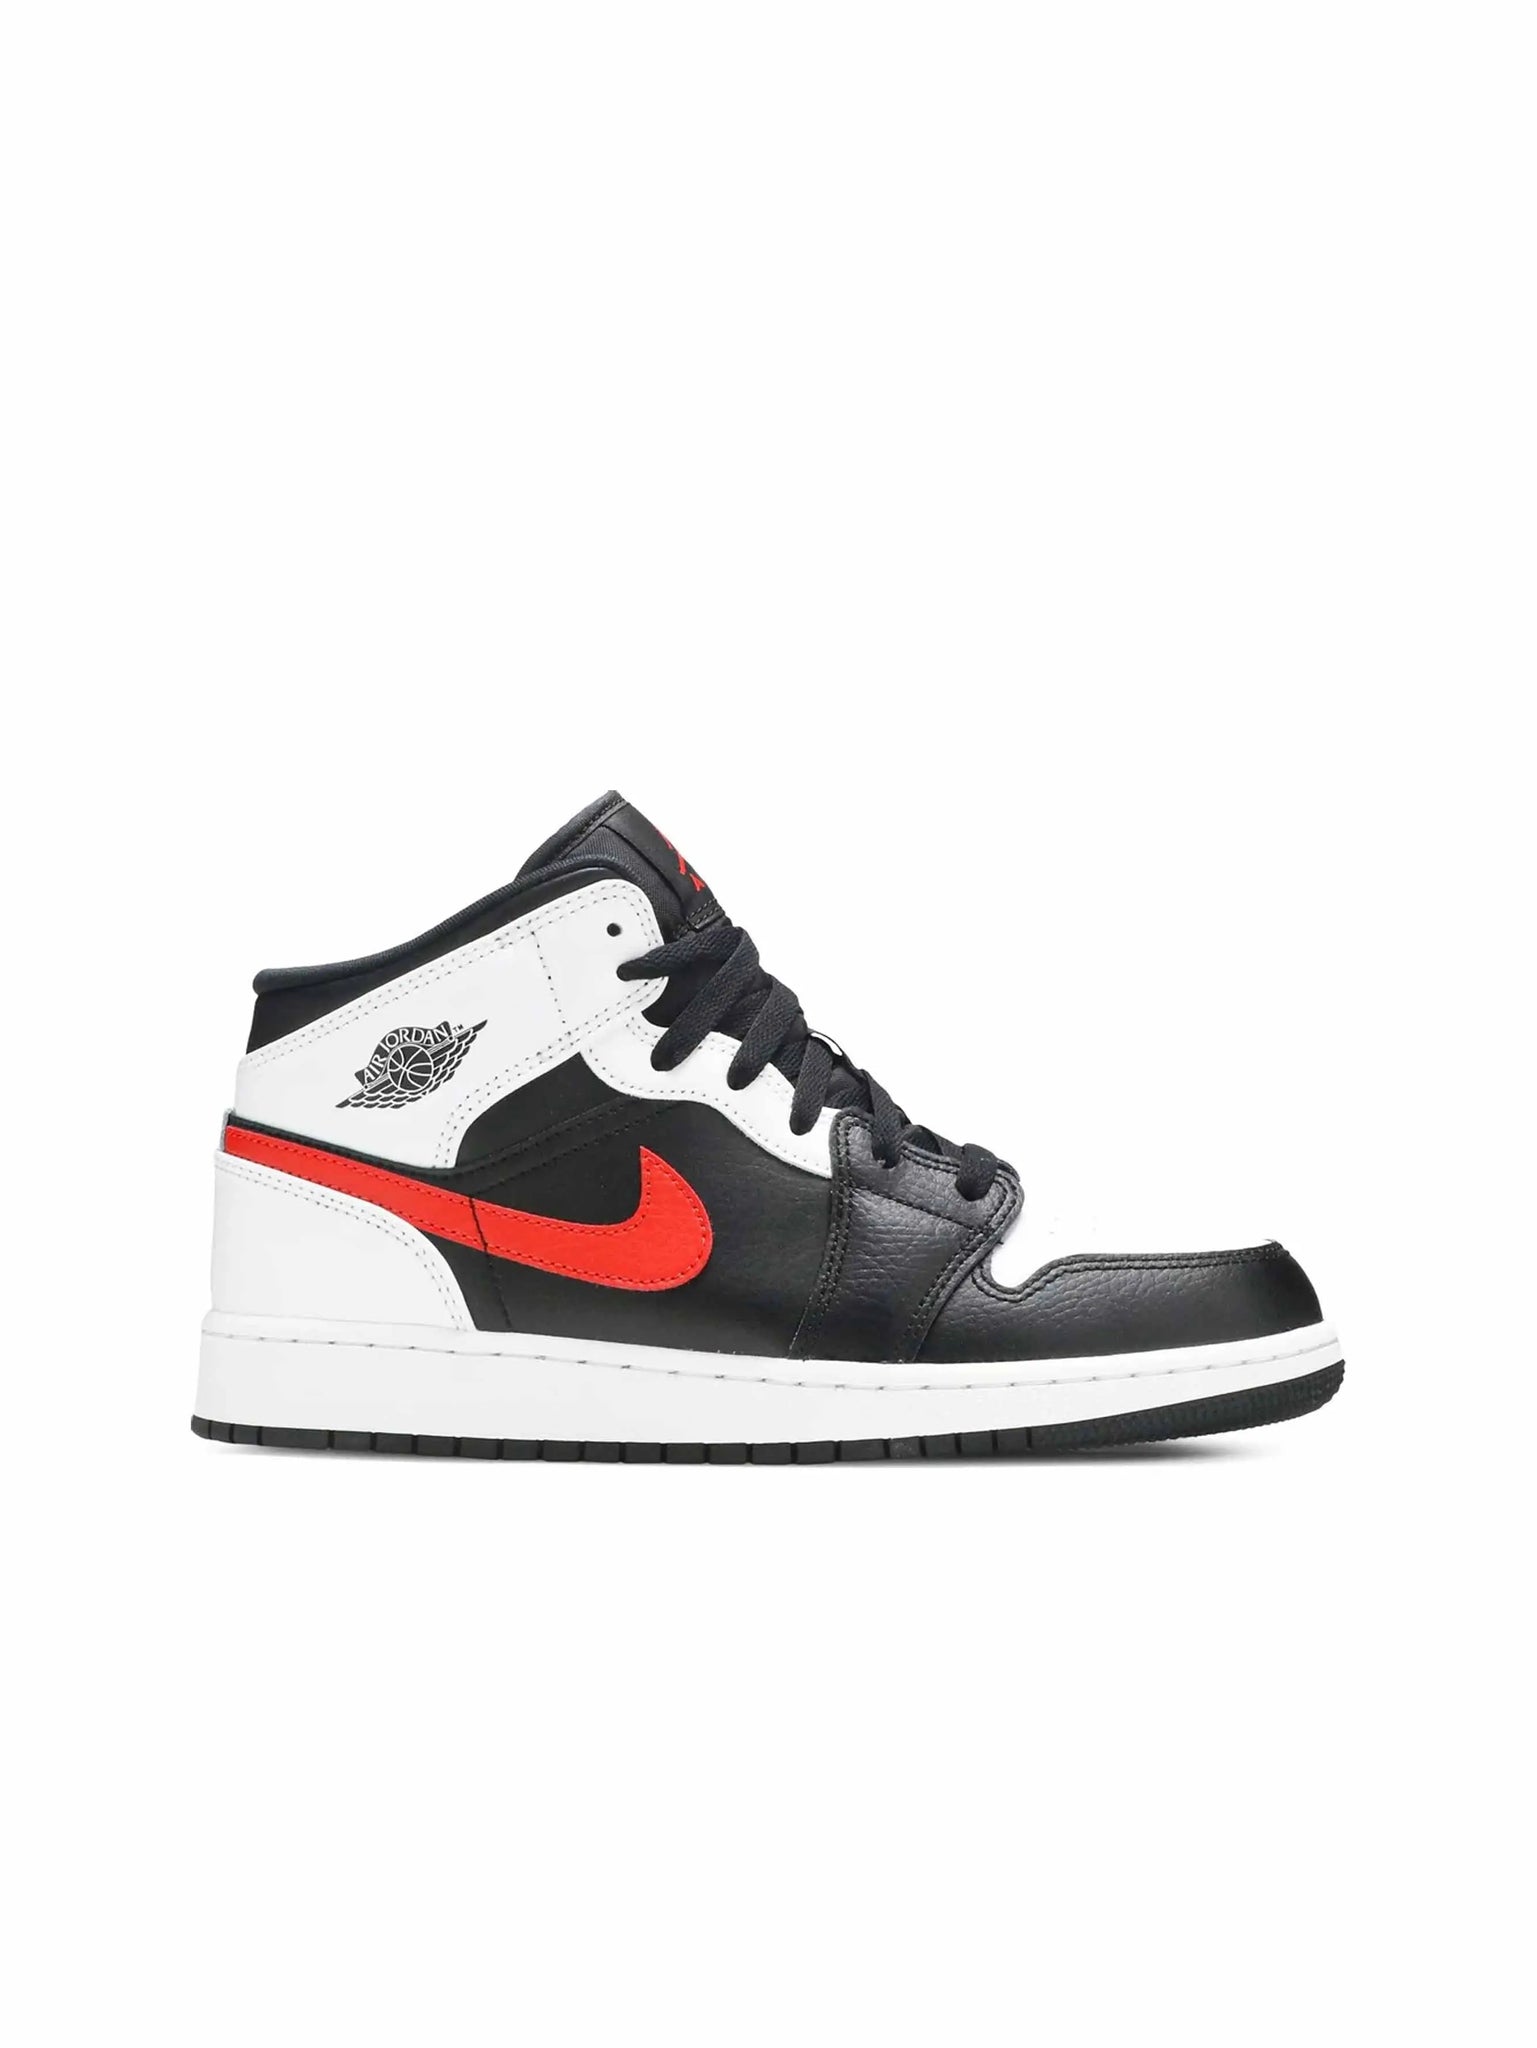 Nike Air Jordan 1 Mid White Black Chile Red (GS) in Auckland, New Zealand - Shop name